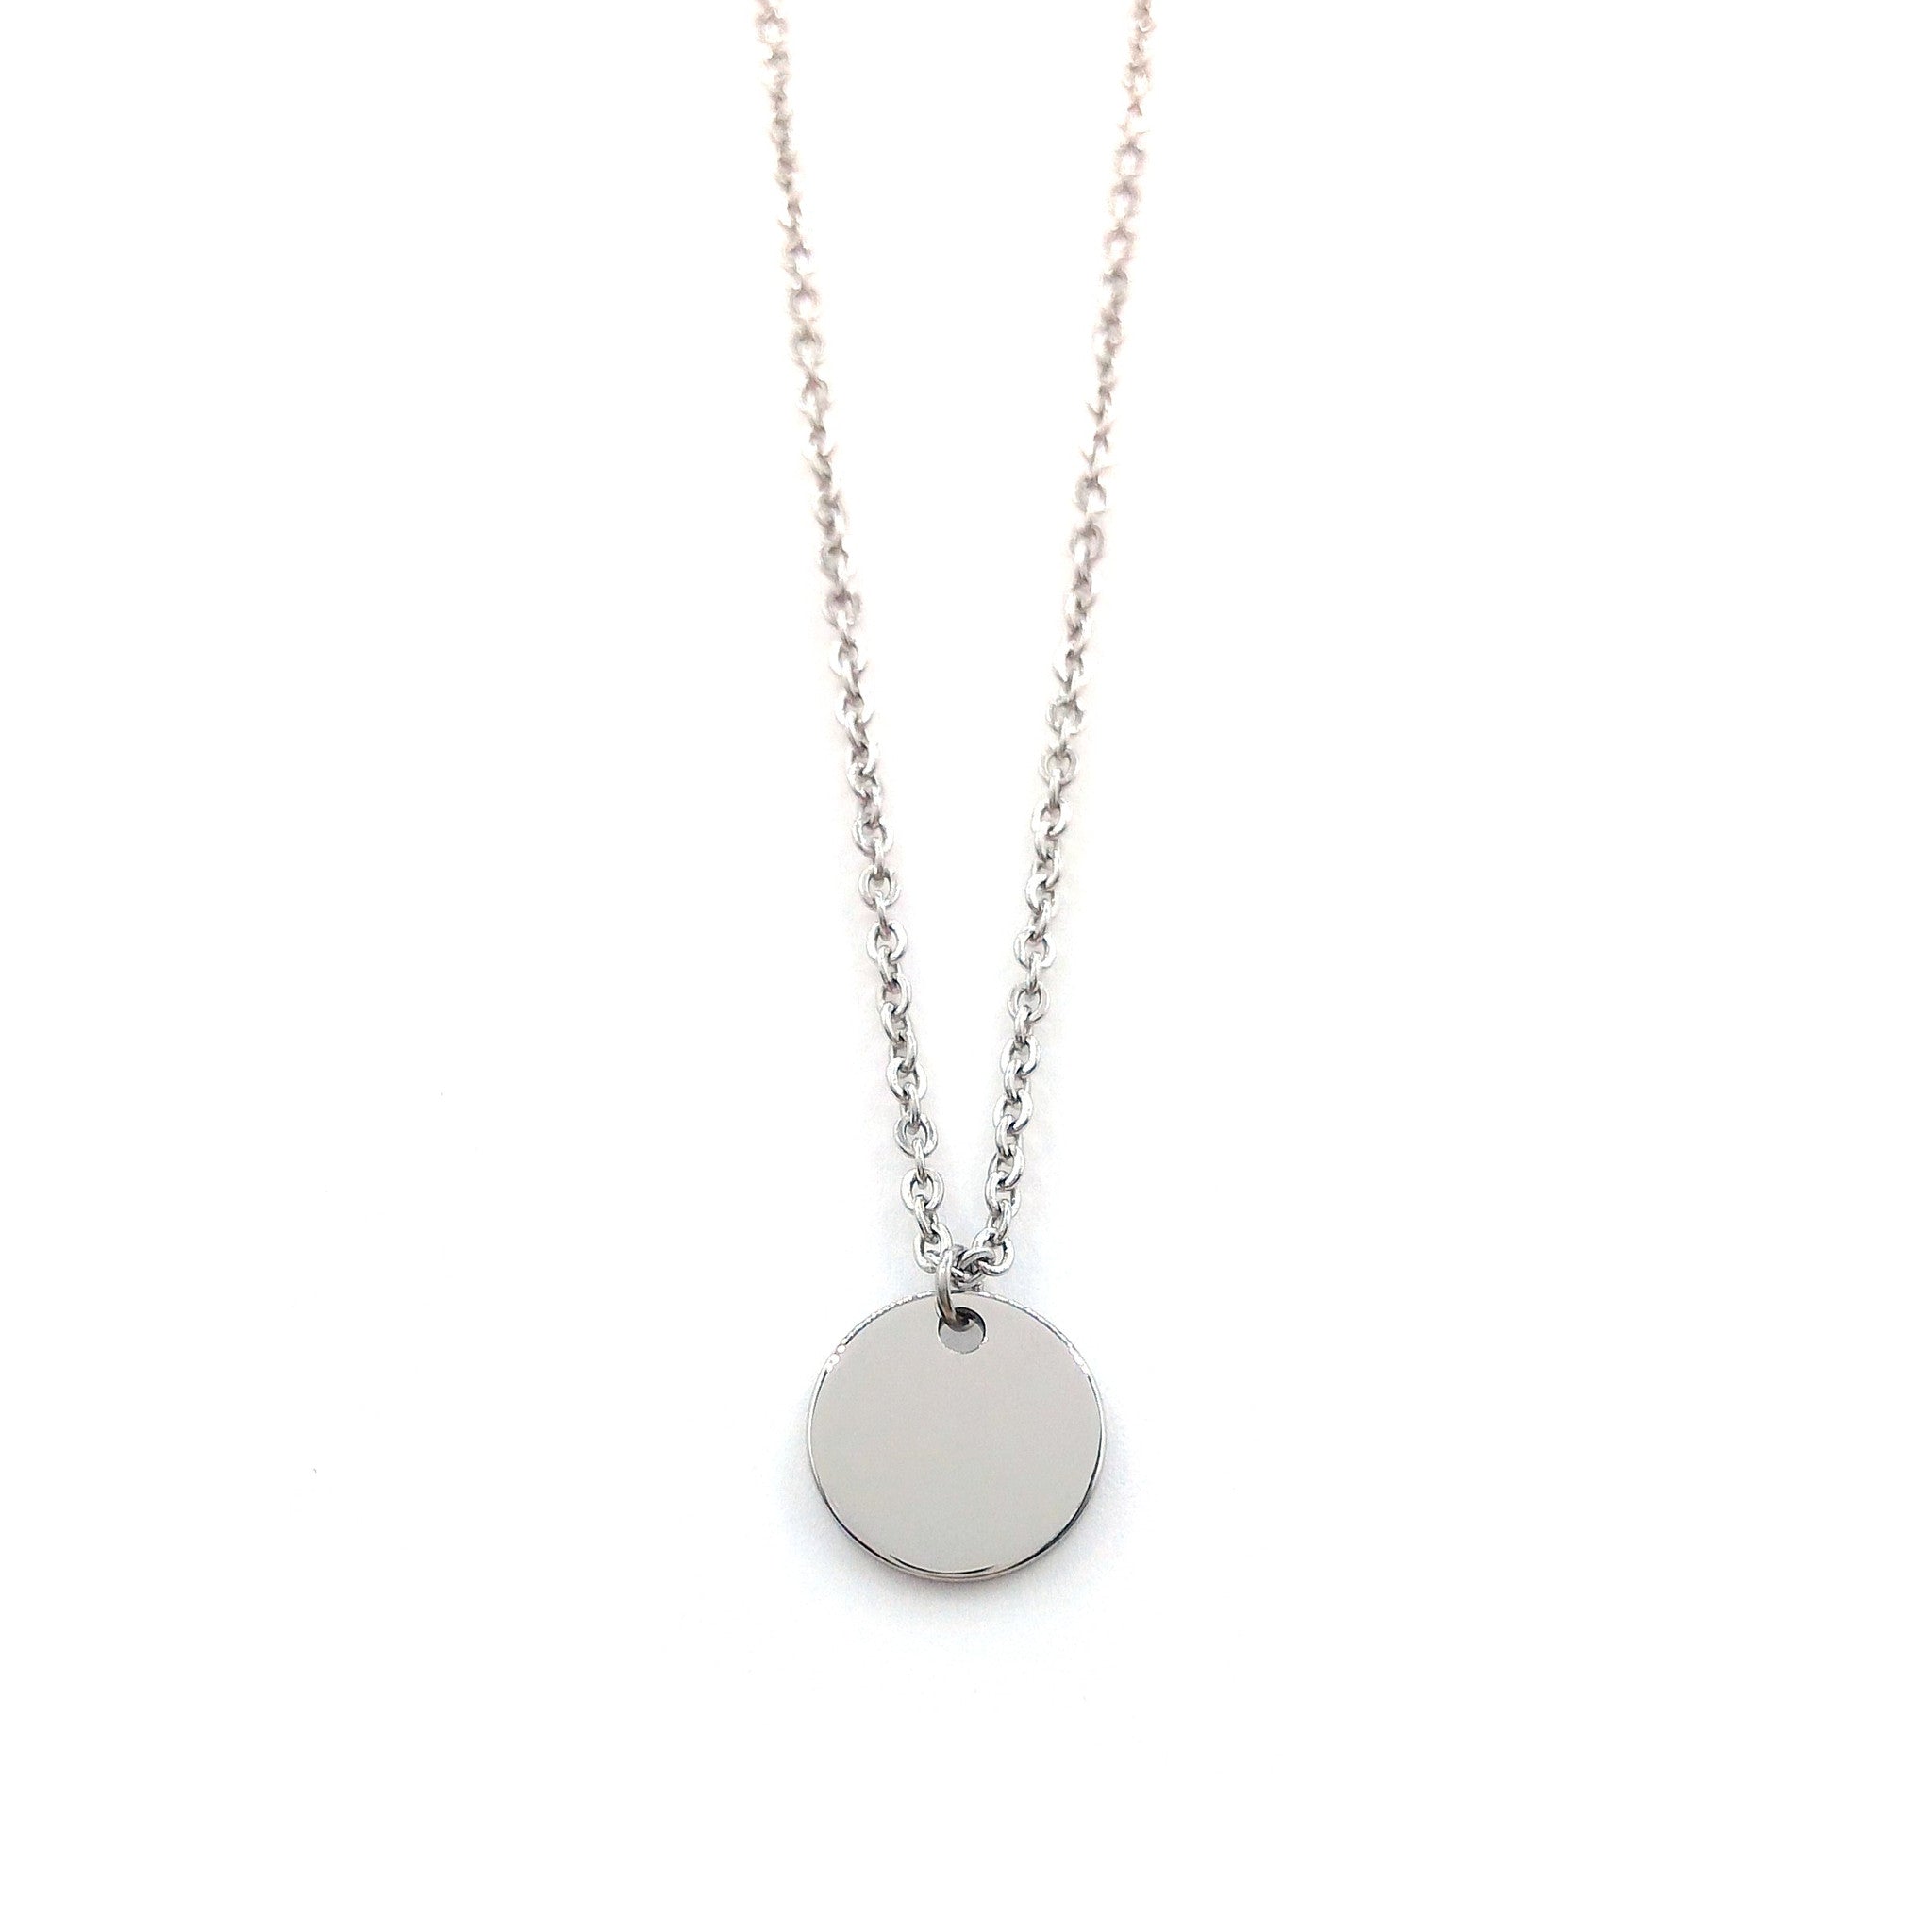 Stainless Steel Tag Necklace